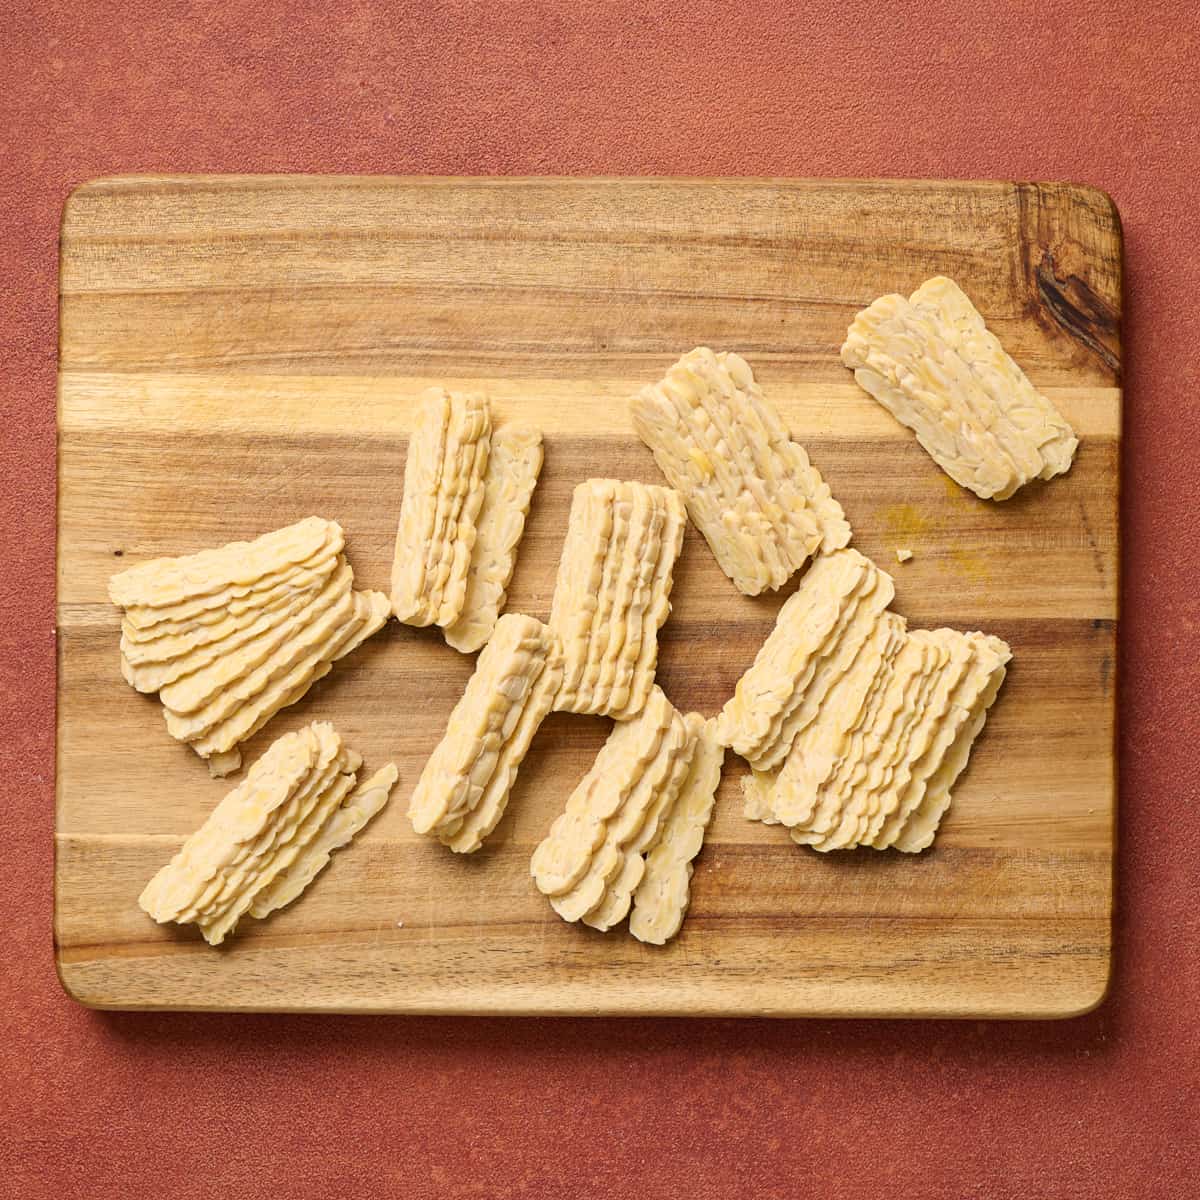 thinly sliced tempeh slices on wooden cutting board.